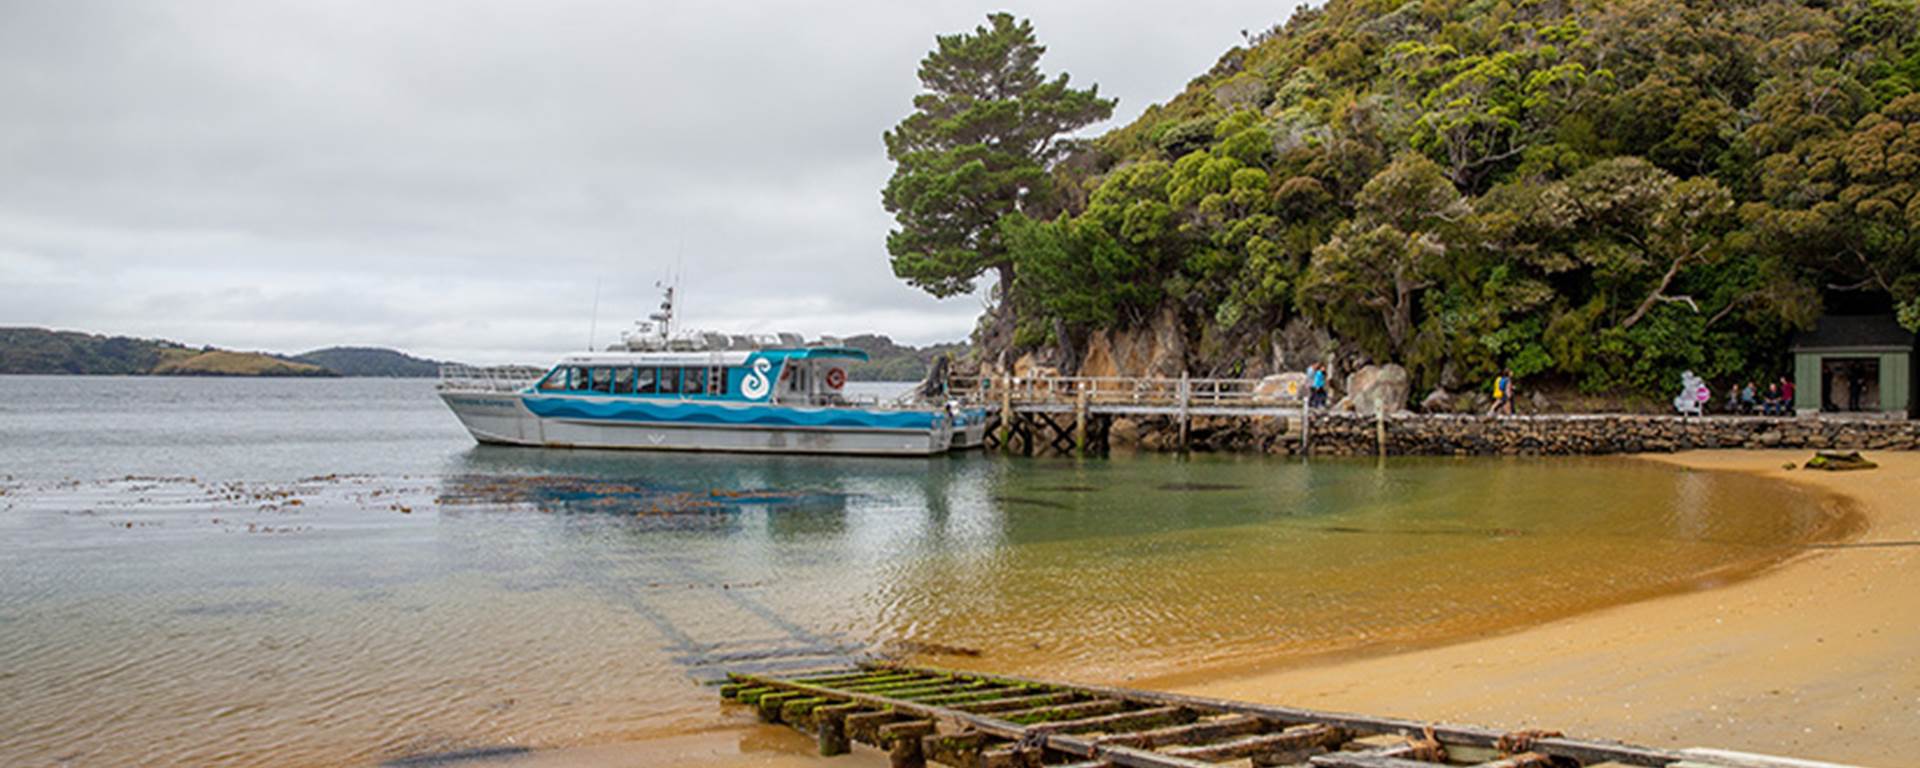 View of the Stewart Island Ferry docked at the beach on Ulva Island